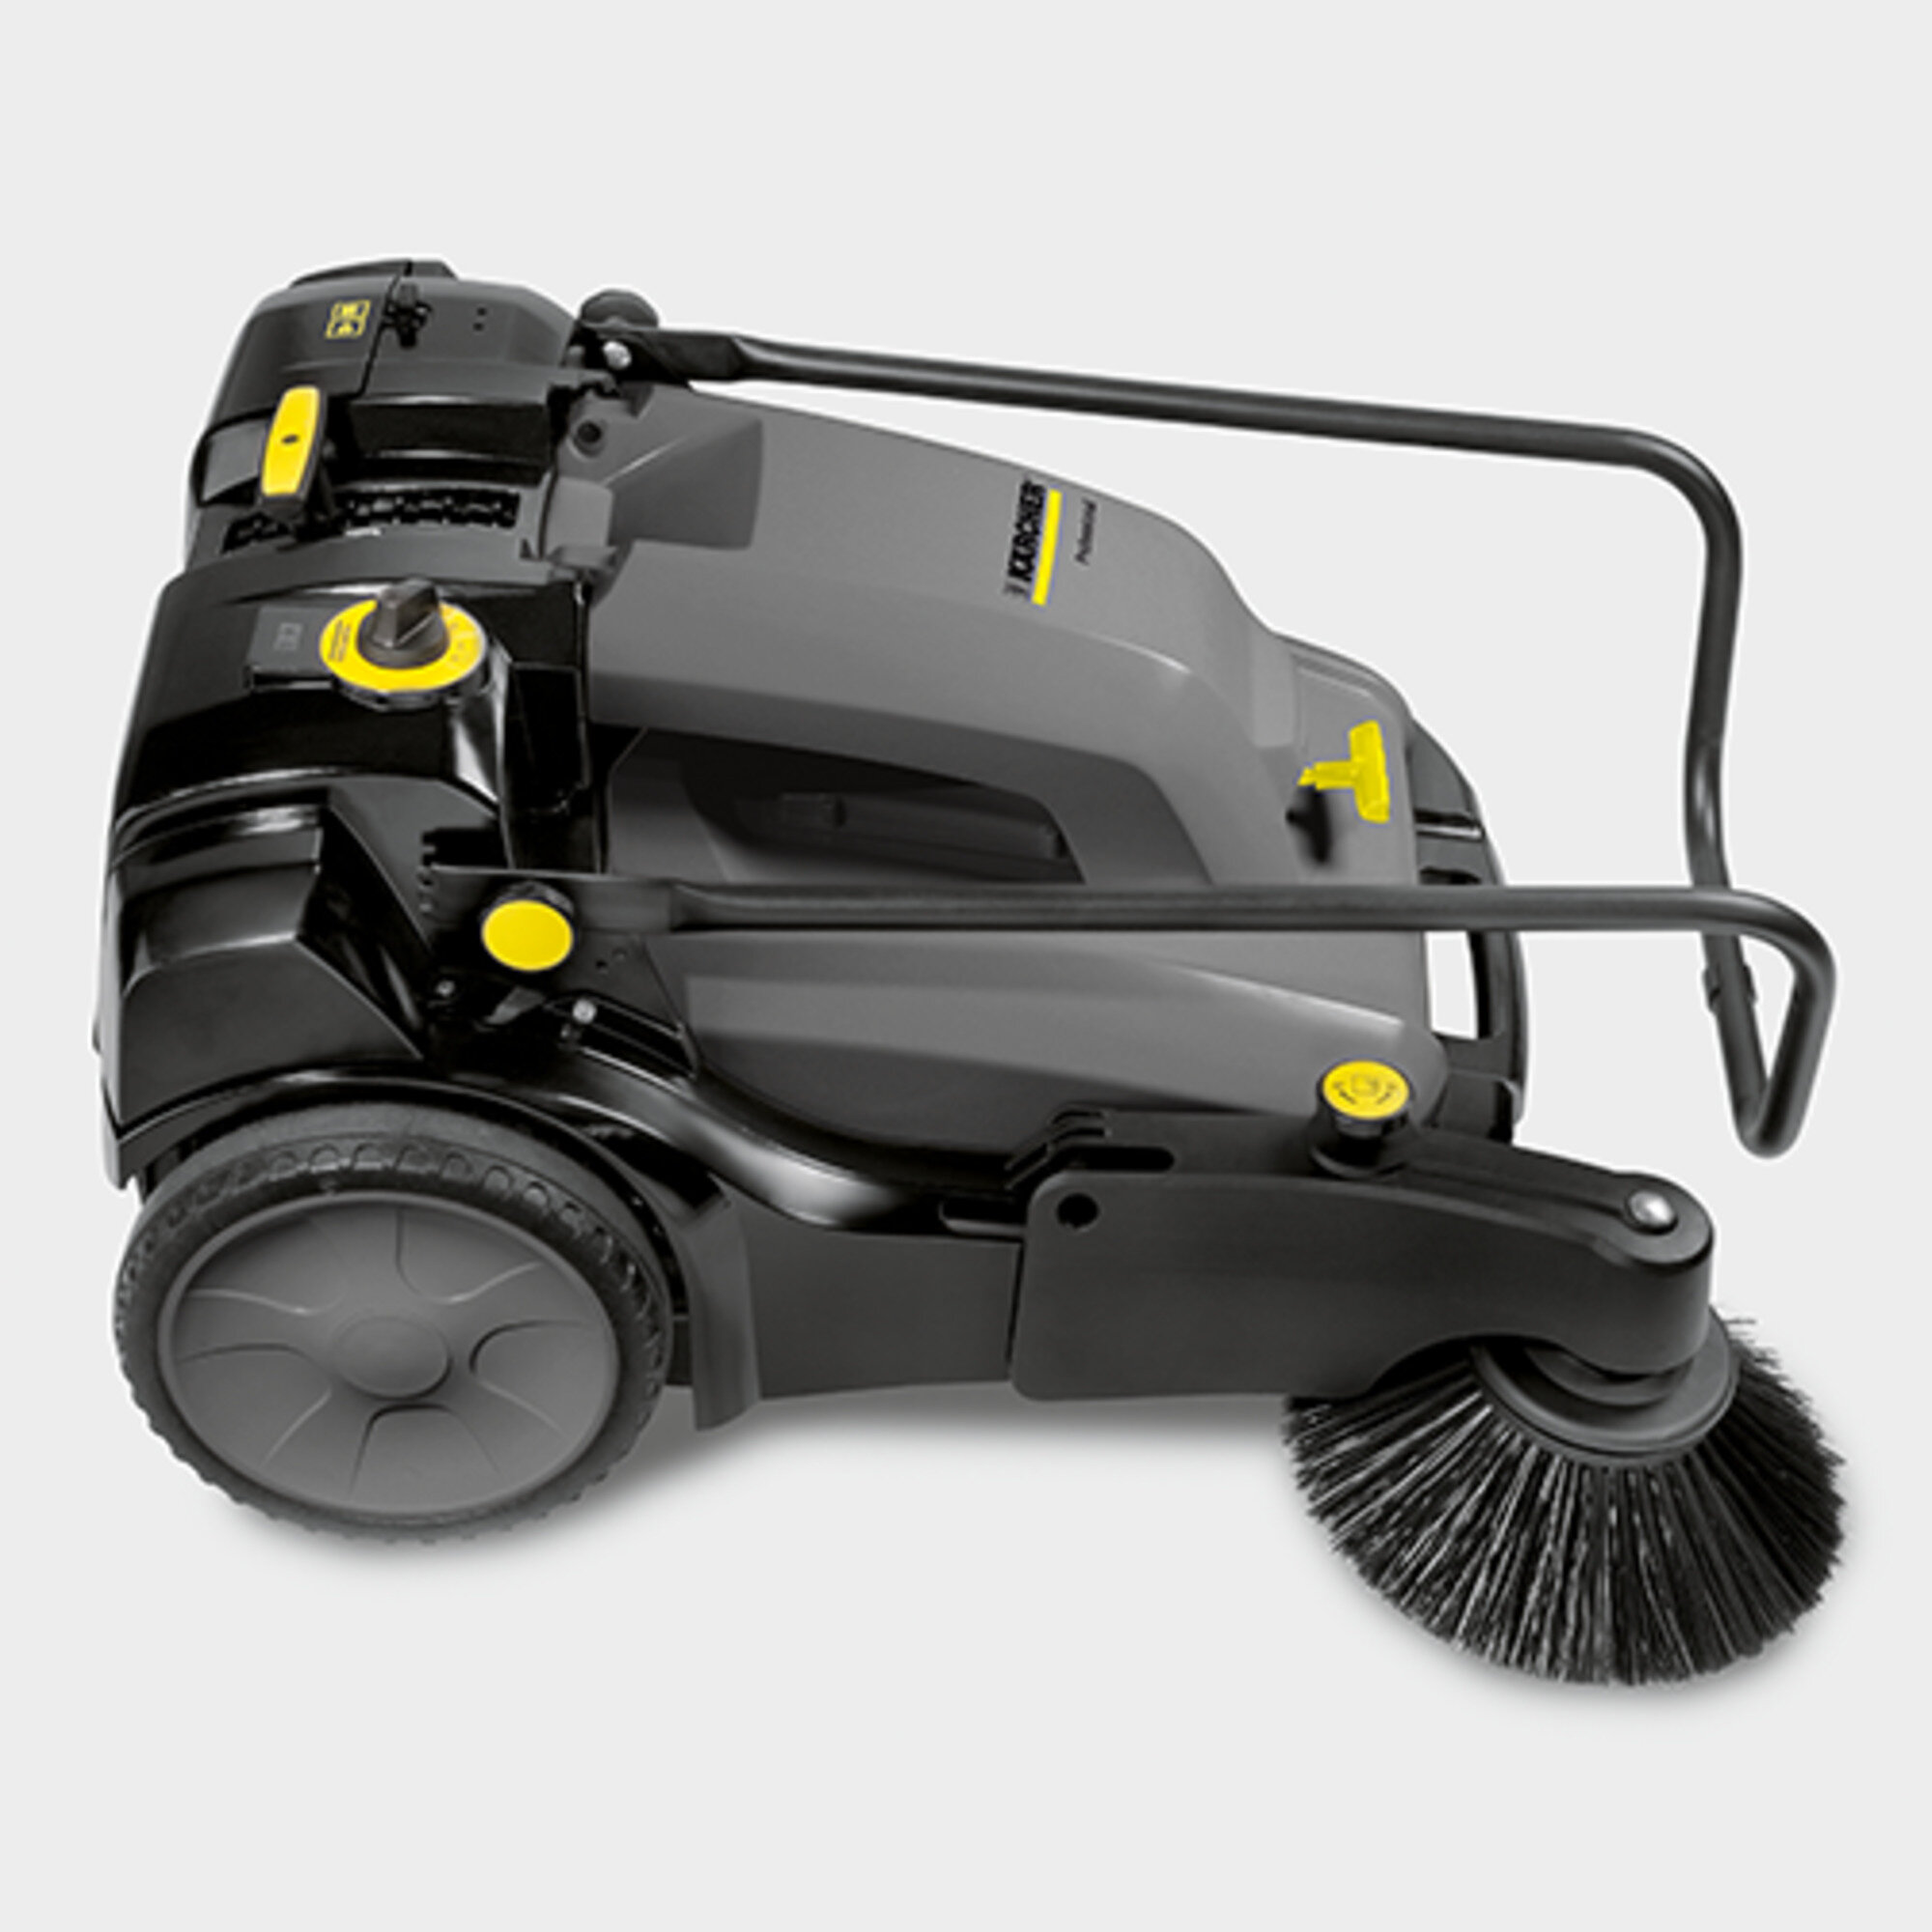 Sweeper KM 70/30 C Bp Adv: Easy to transport